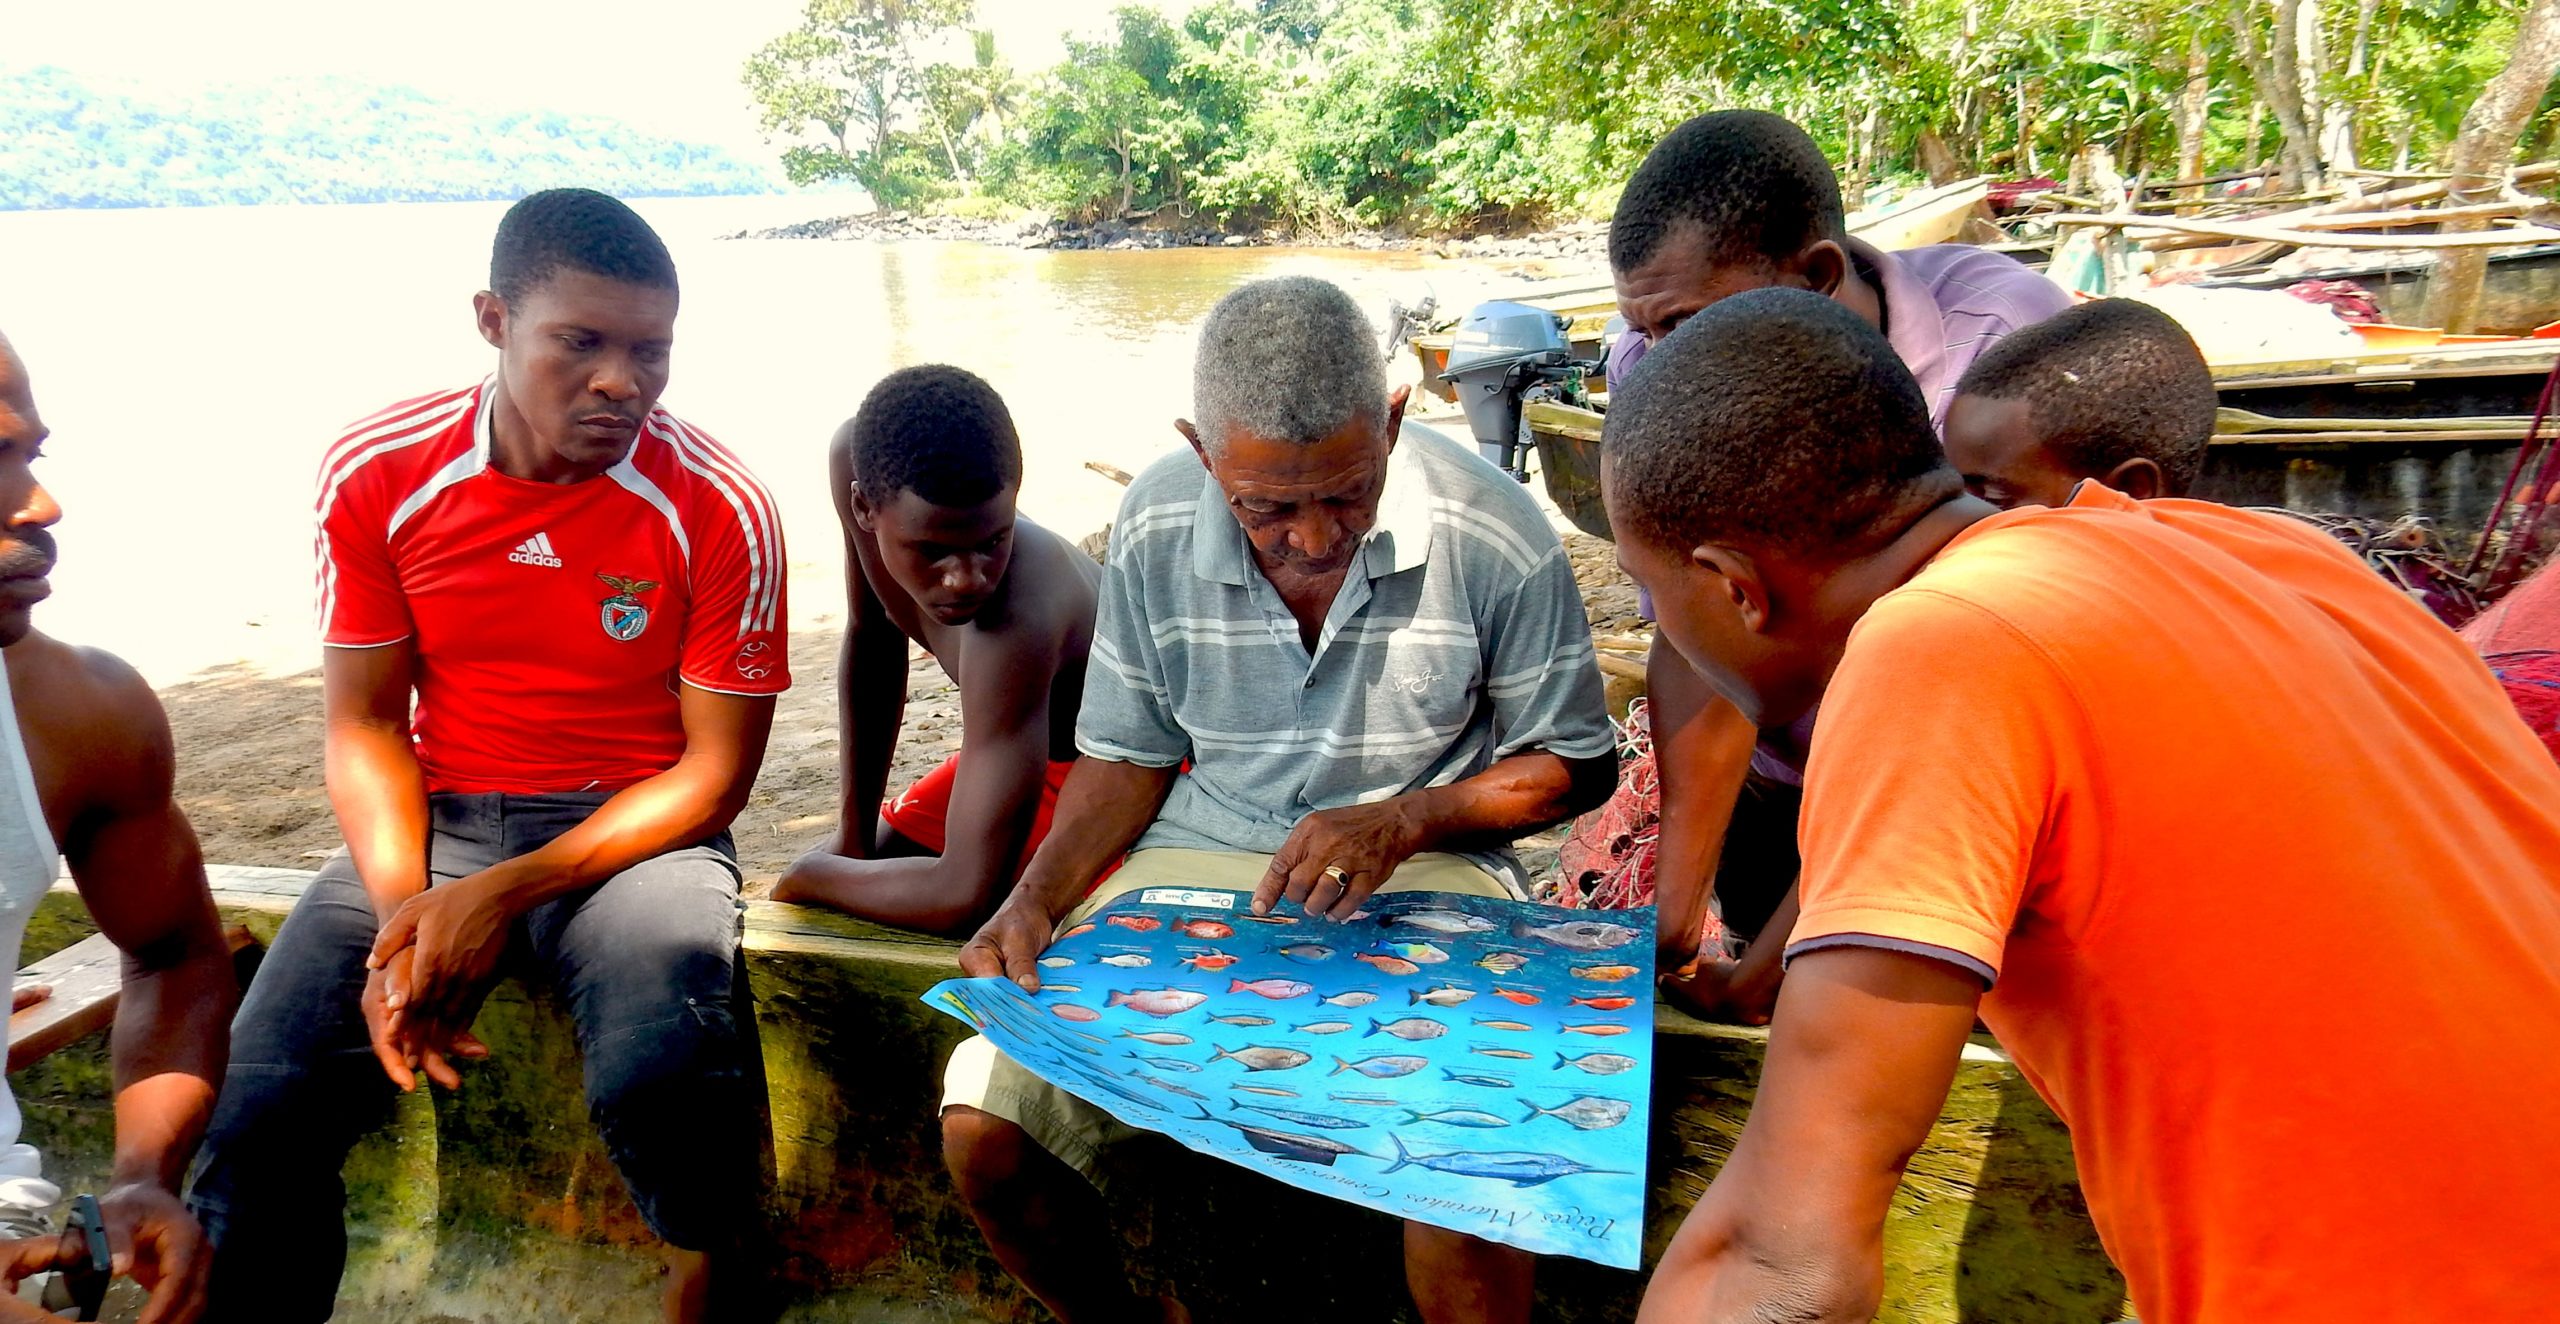 Laying strong foundations for sustainable small-scale fisheries and marine conservation